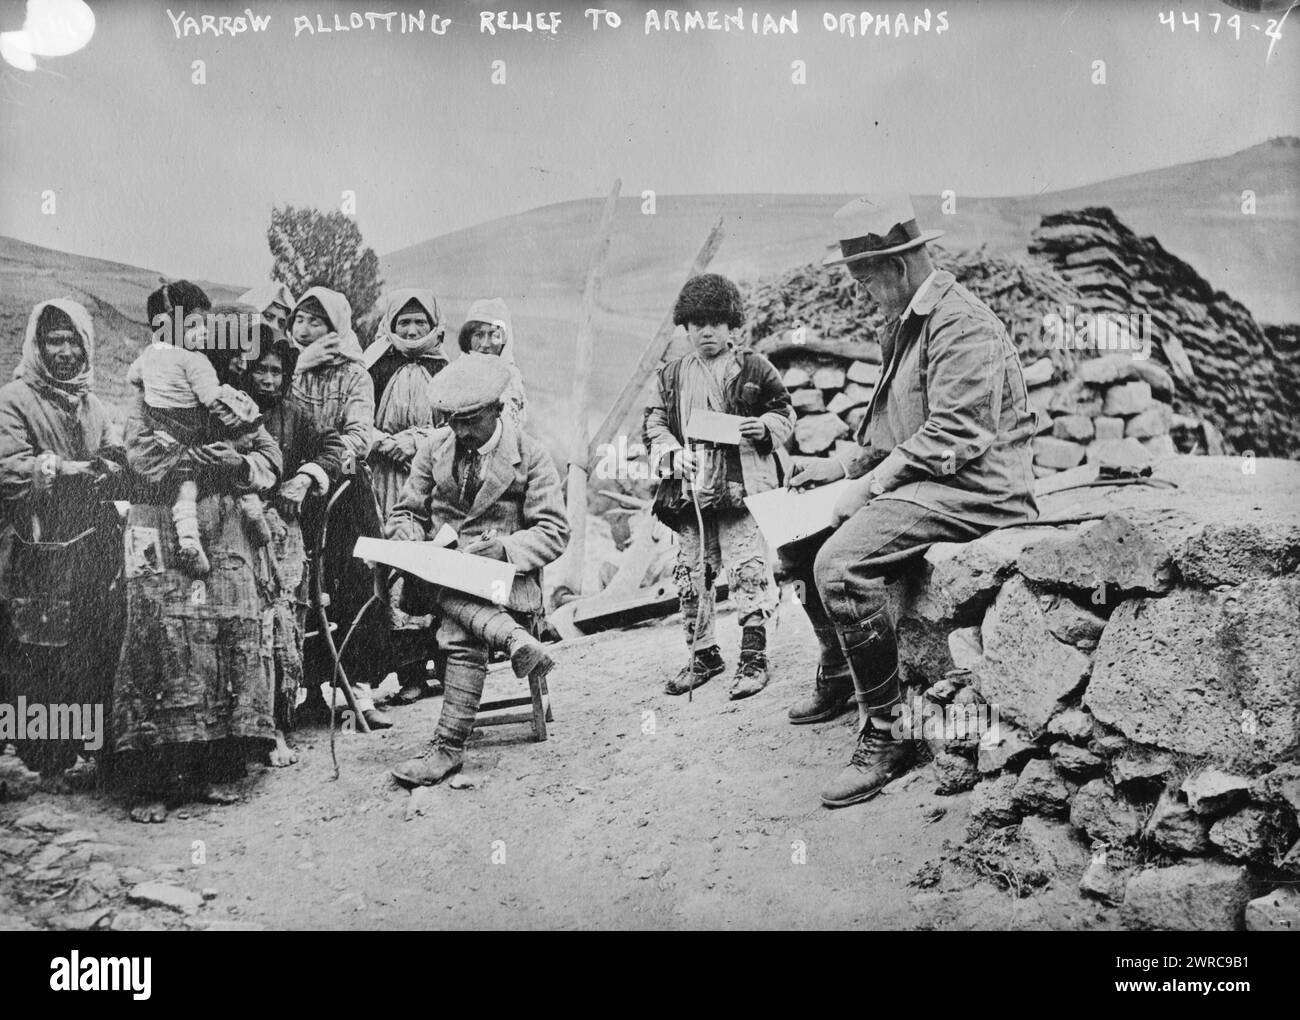 Yarrow allotting relief to Armenian orphans, Photograph shows missionary Ernest Alfred Yarrow (1876-1939), who served as head of the Near East Relief in Armenia with Armenian women and children., between ca. 1915 and ca. 1920, Glass negatives, 1 negative: glass Stock Photo